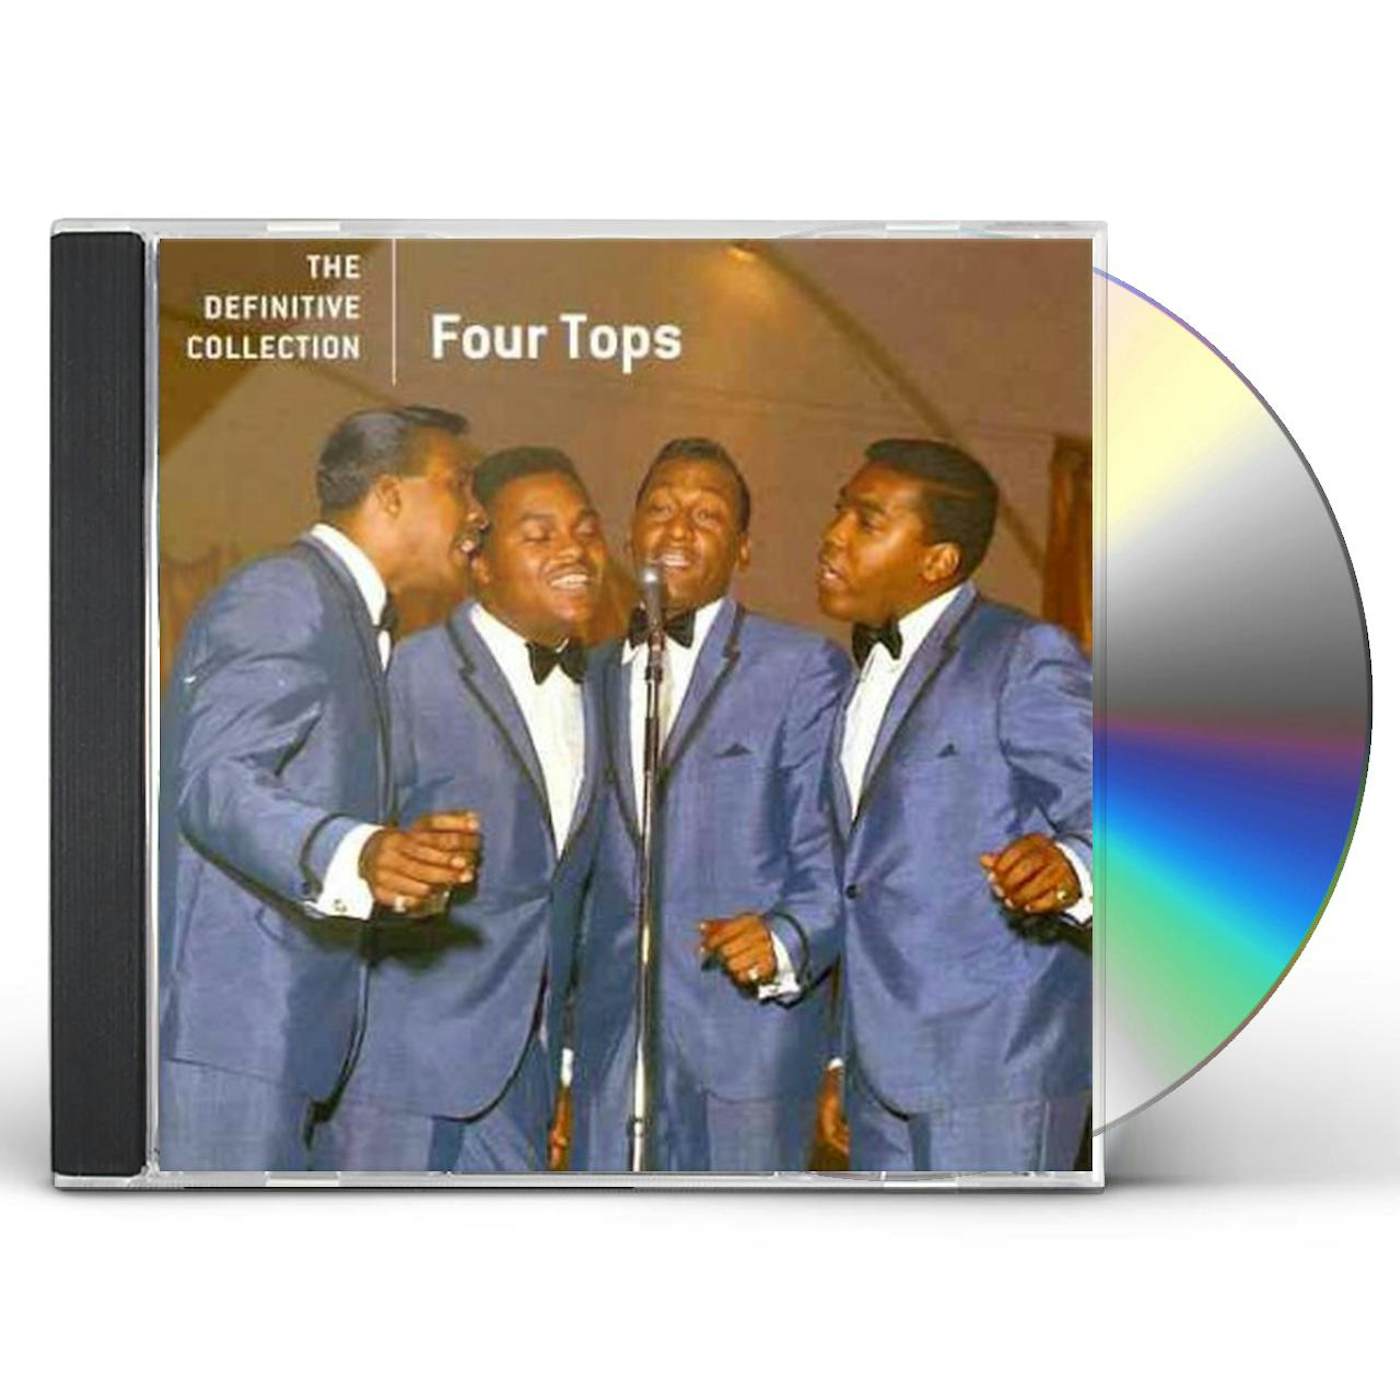 Four Tops DEFINITIVE COLLECTION CD